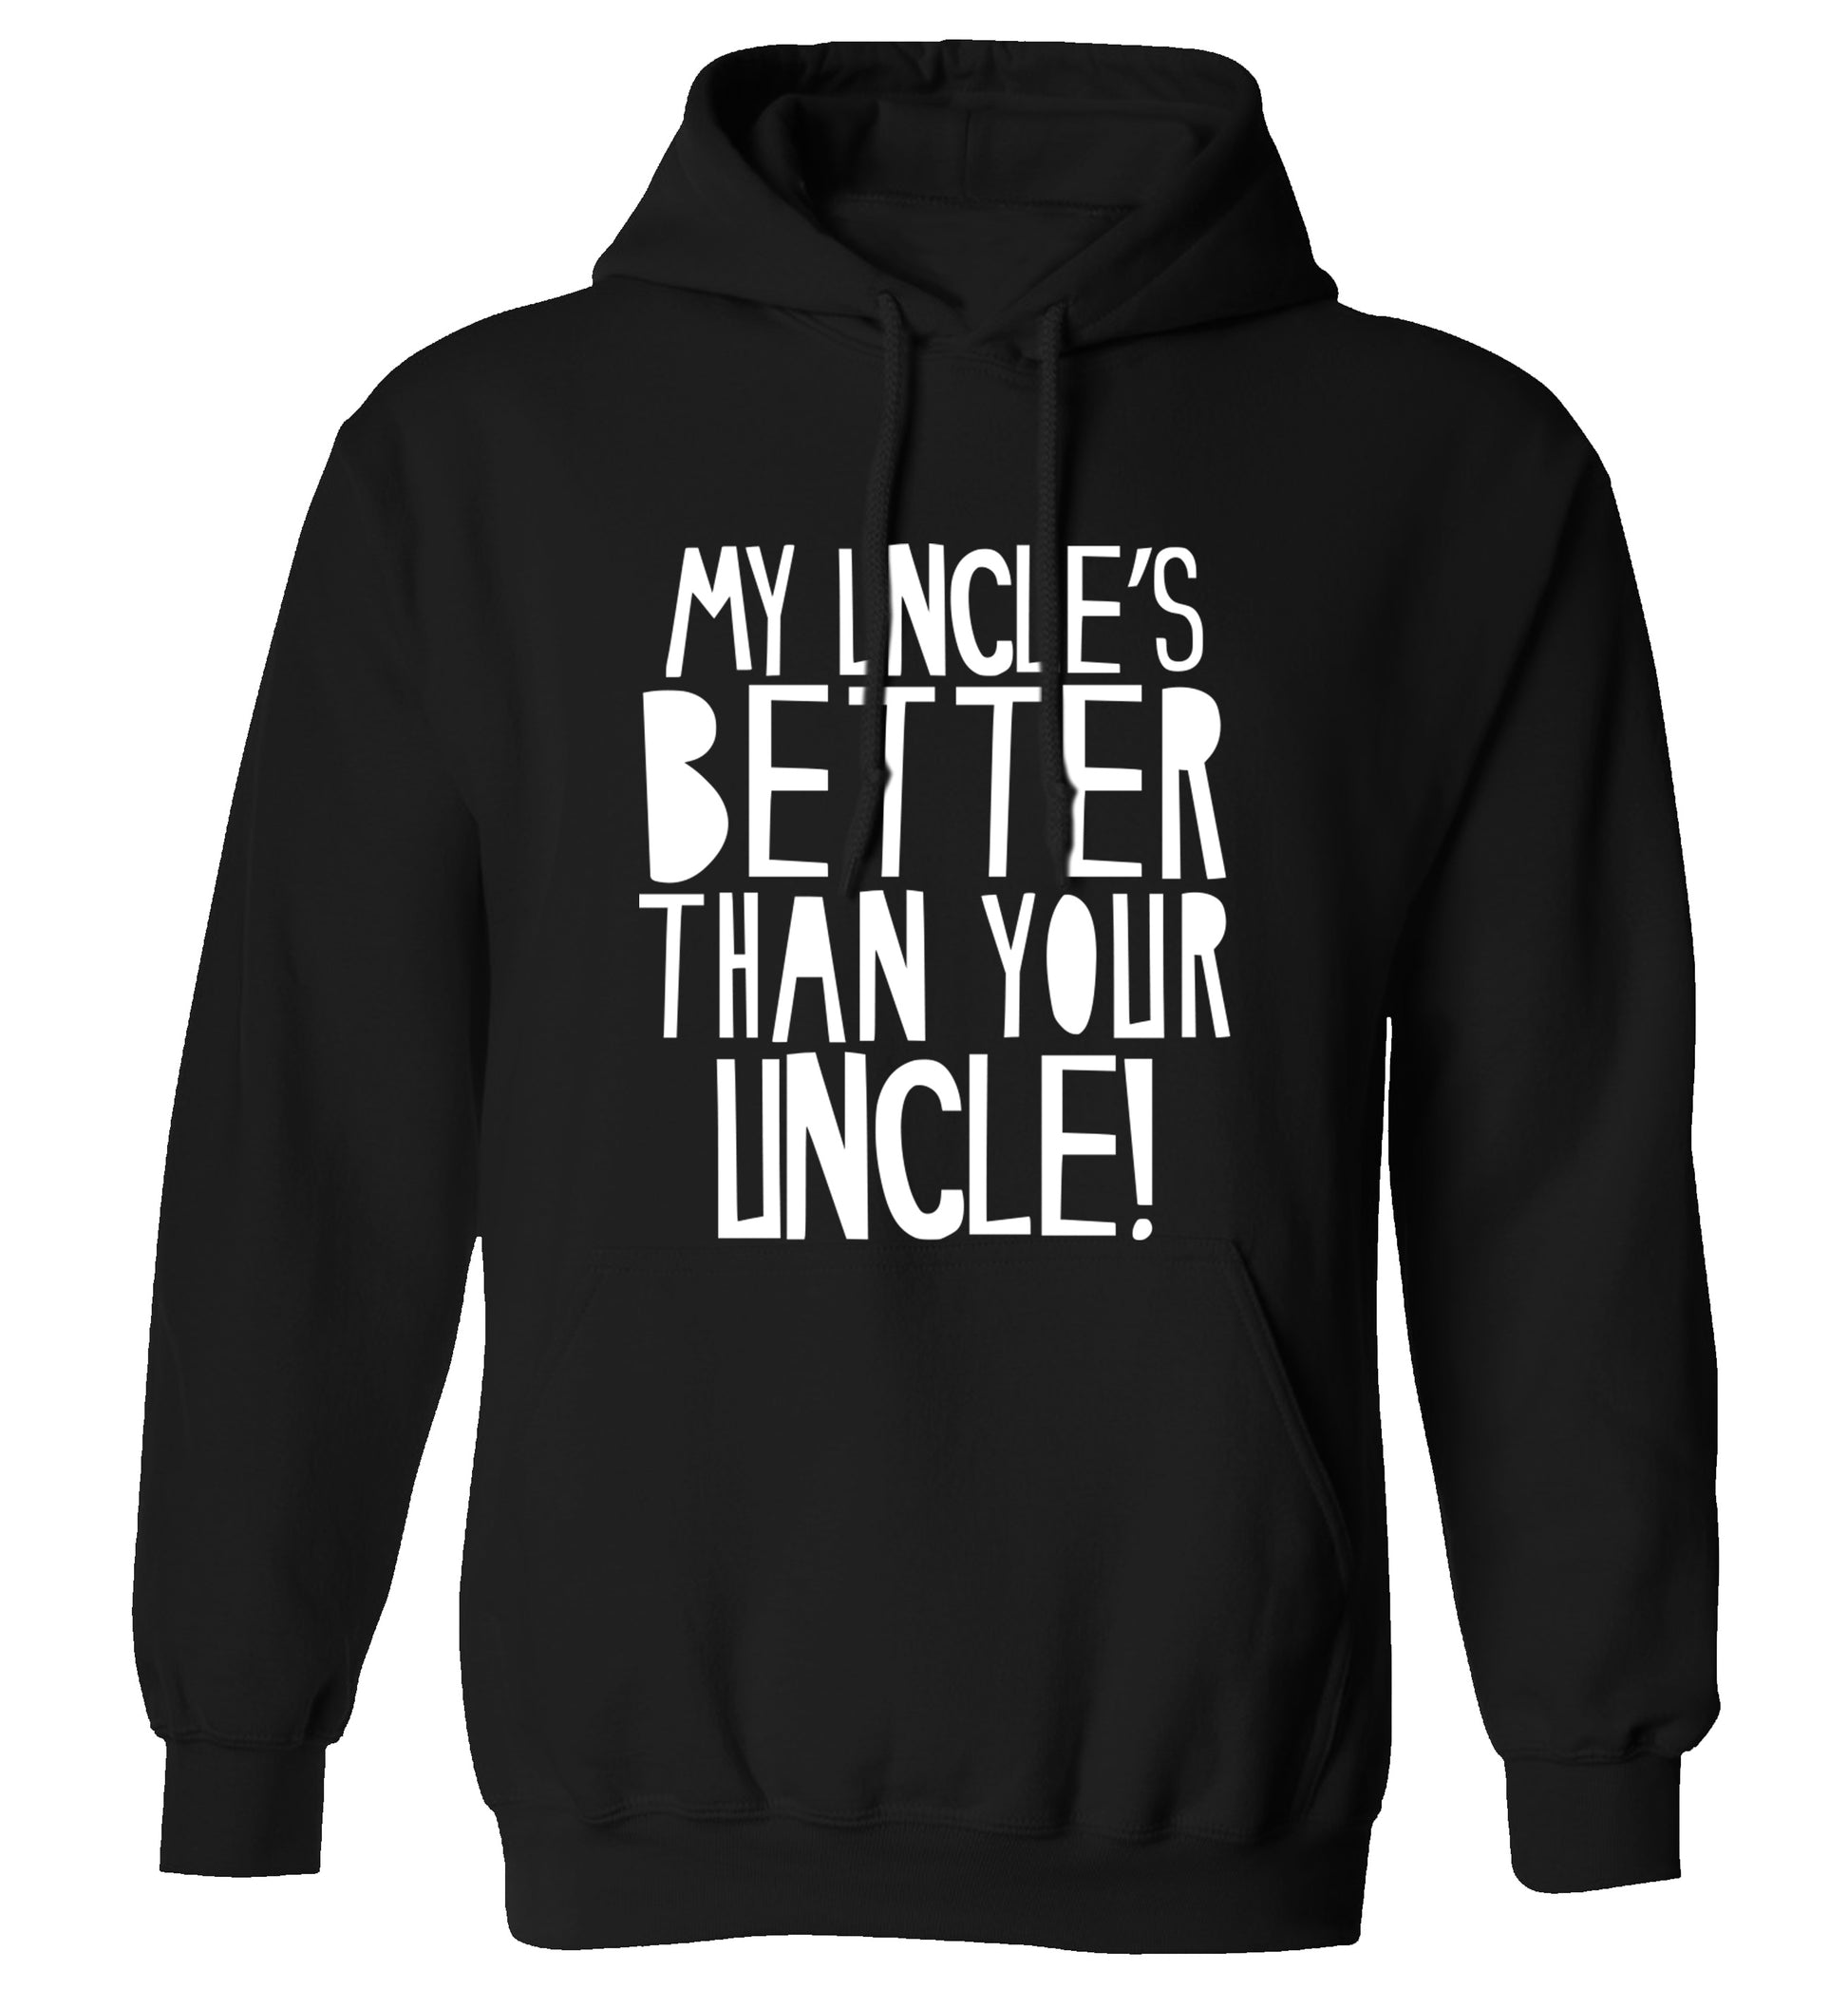 My uncles better than your uncle adults unisex black hoodie 2XL